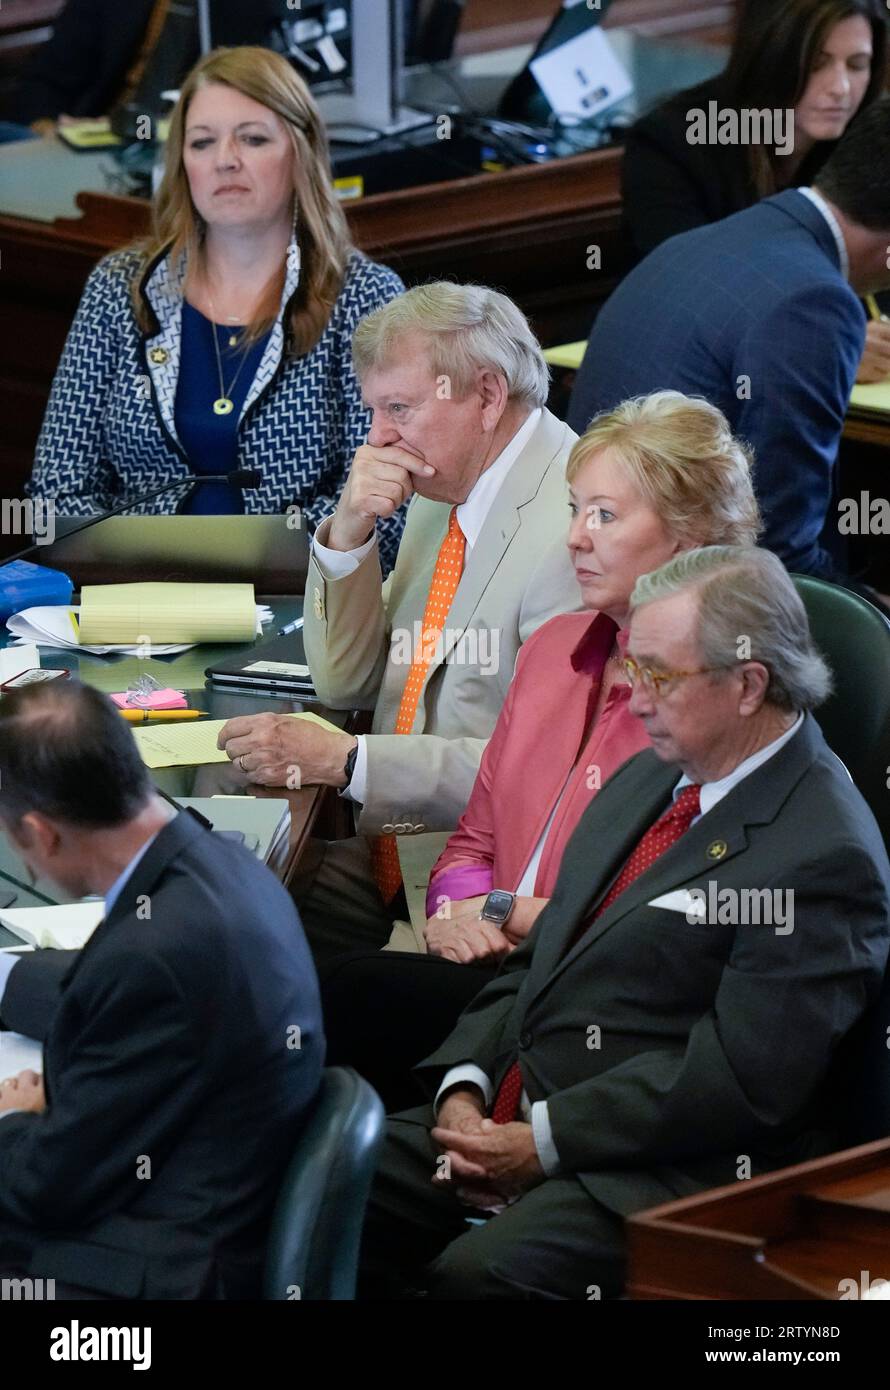 Prosecutors RUSTY HARDIN, HARRIET O'NEILL and DICK DEGUERIN listen during final arguments as both sides have rested in Texas Attorney General Ken Paxton's impeachment trial in the Texas Senate on September 15, 2023. The jury is deliberating the charges late Friday afternoon. Credit: Bob Daemmrich/Alamy Live News Stock Photo